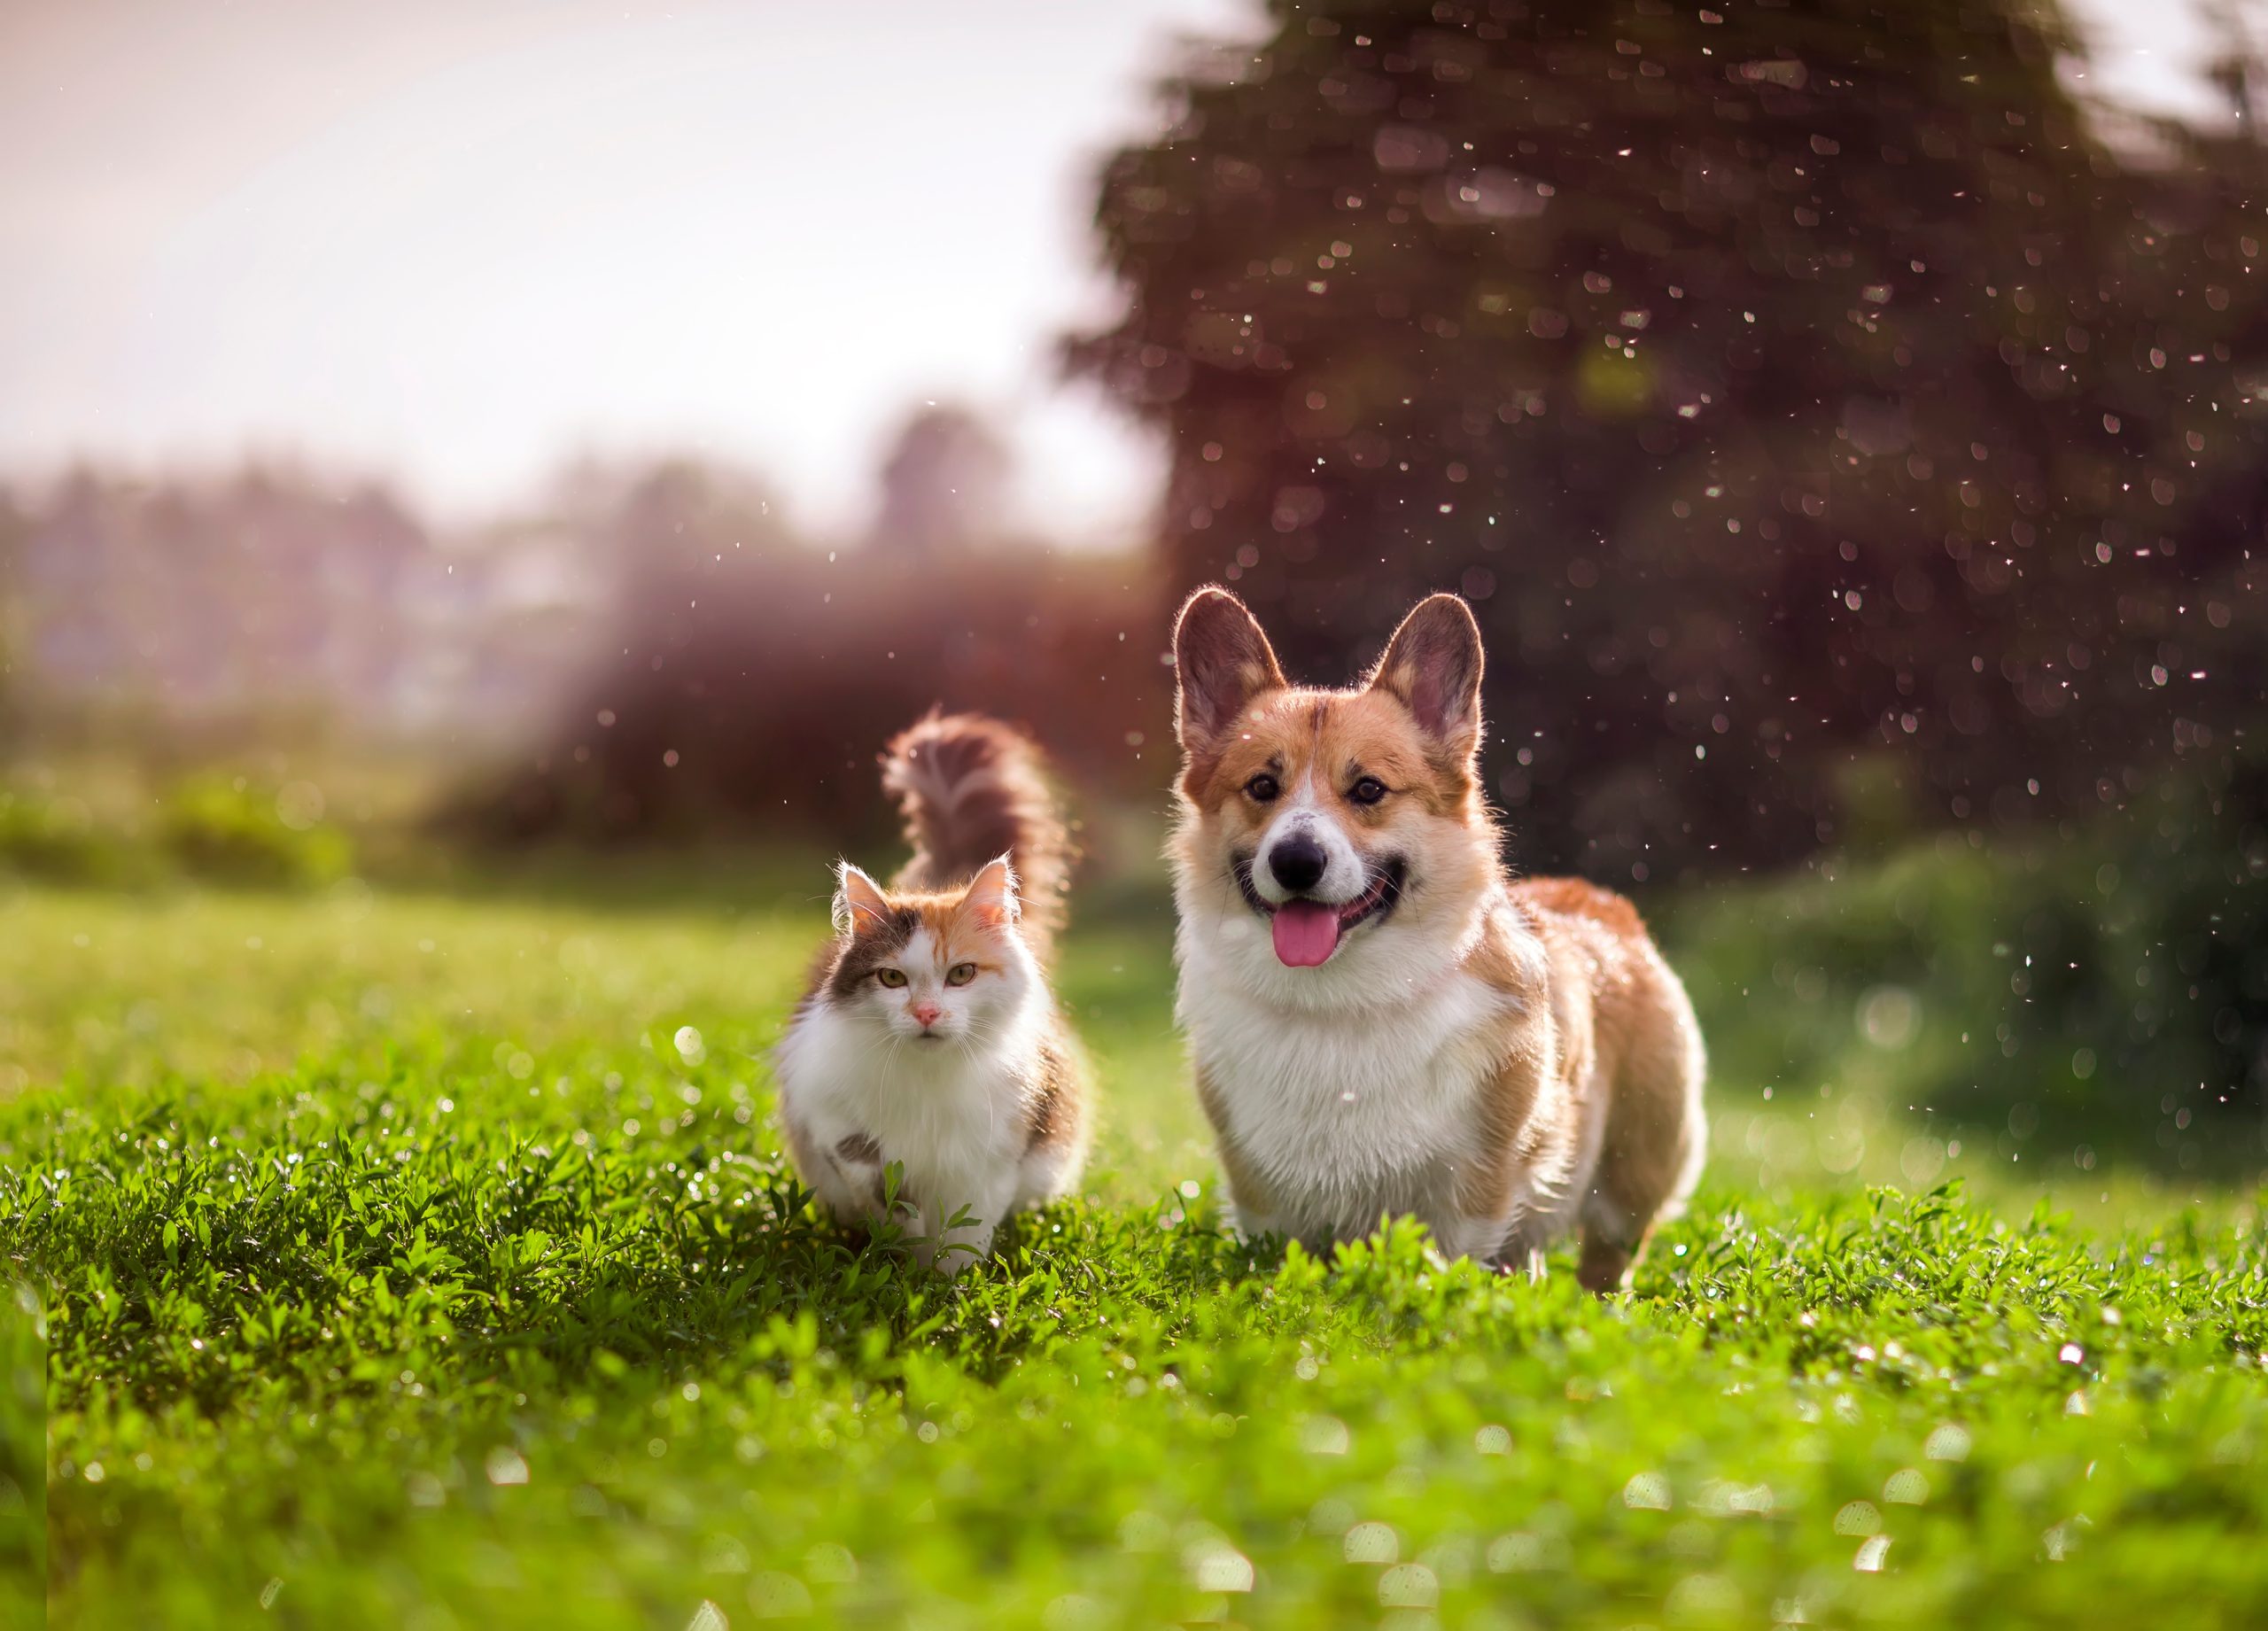 7 Simple Ways You Can Improve Your Pet’s Life